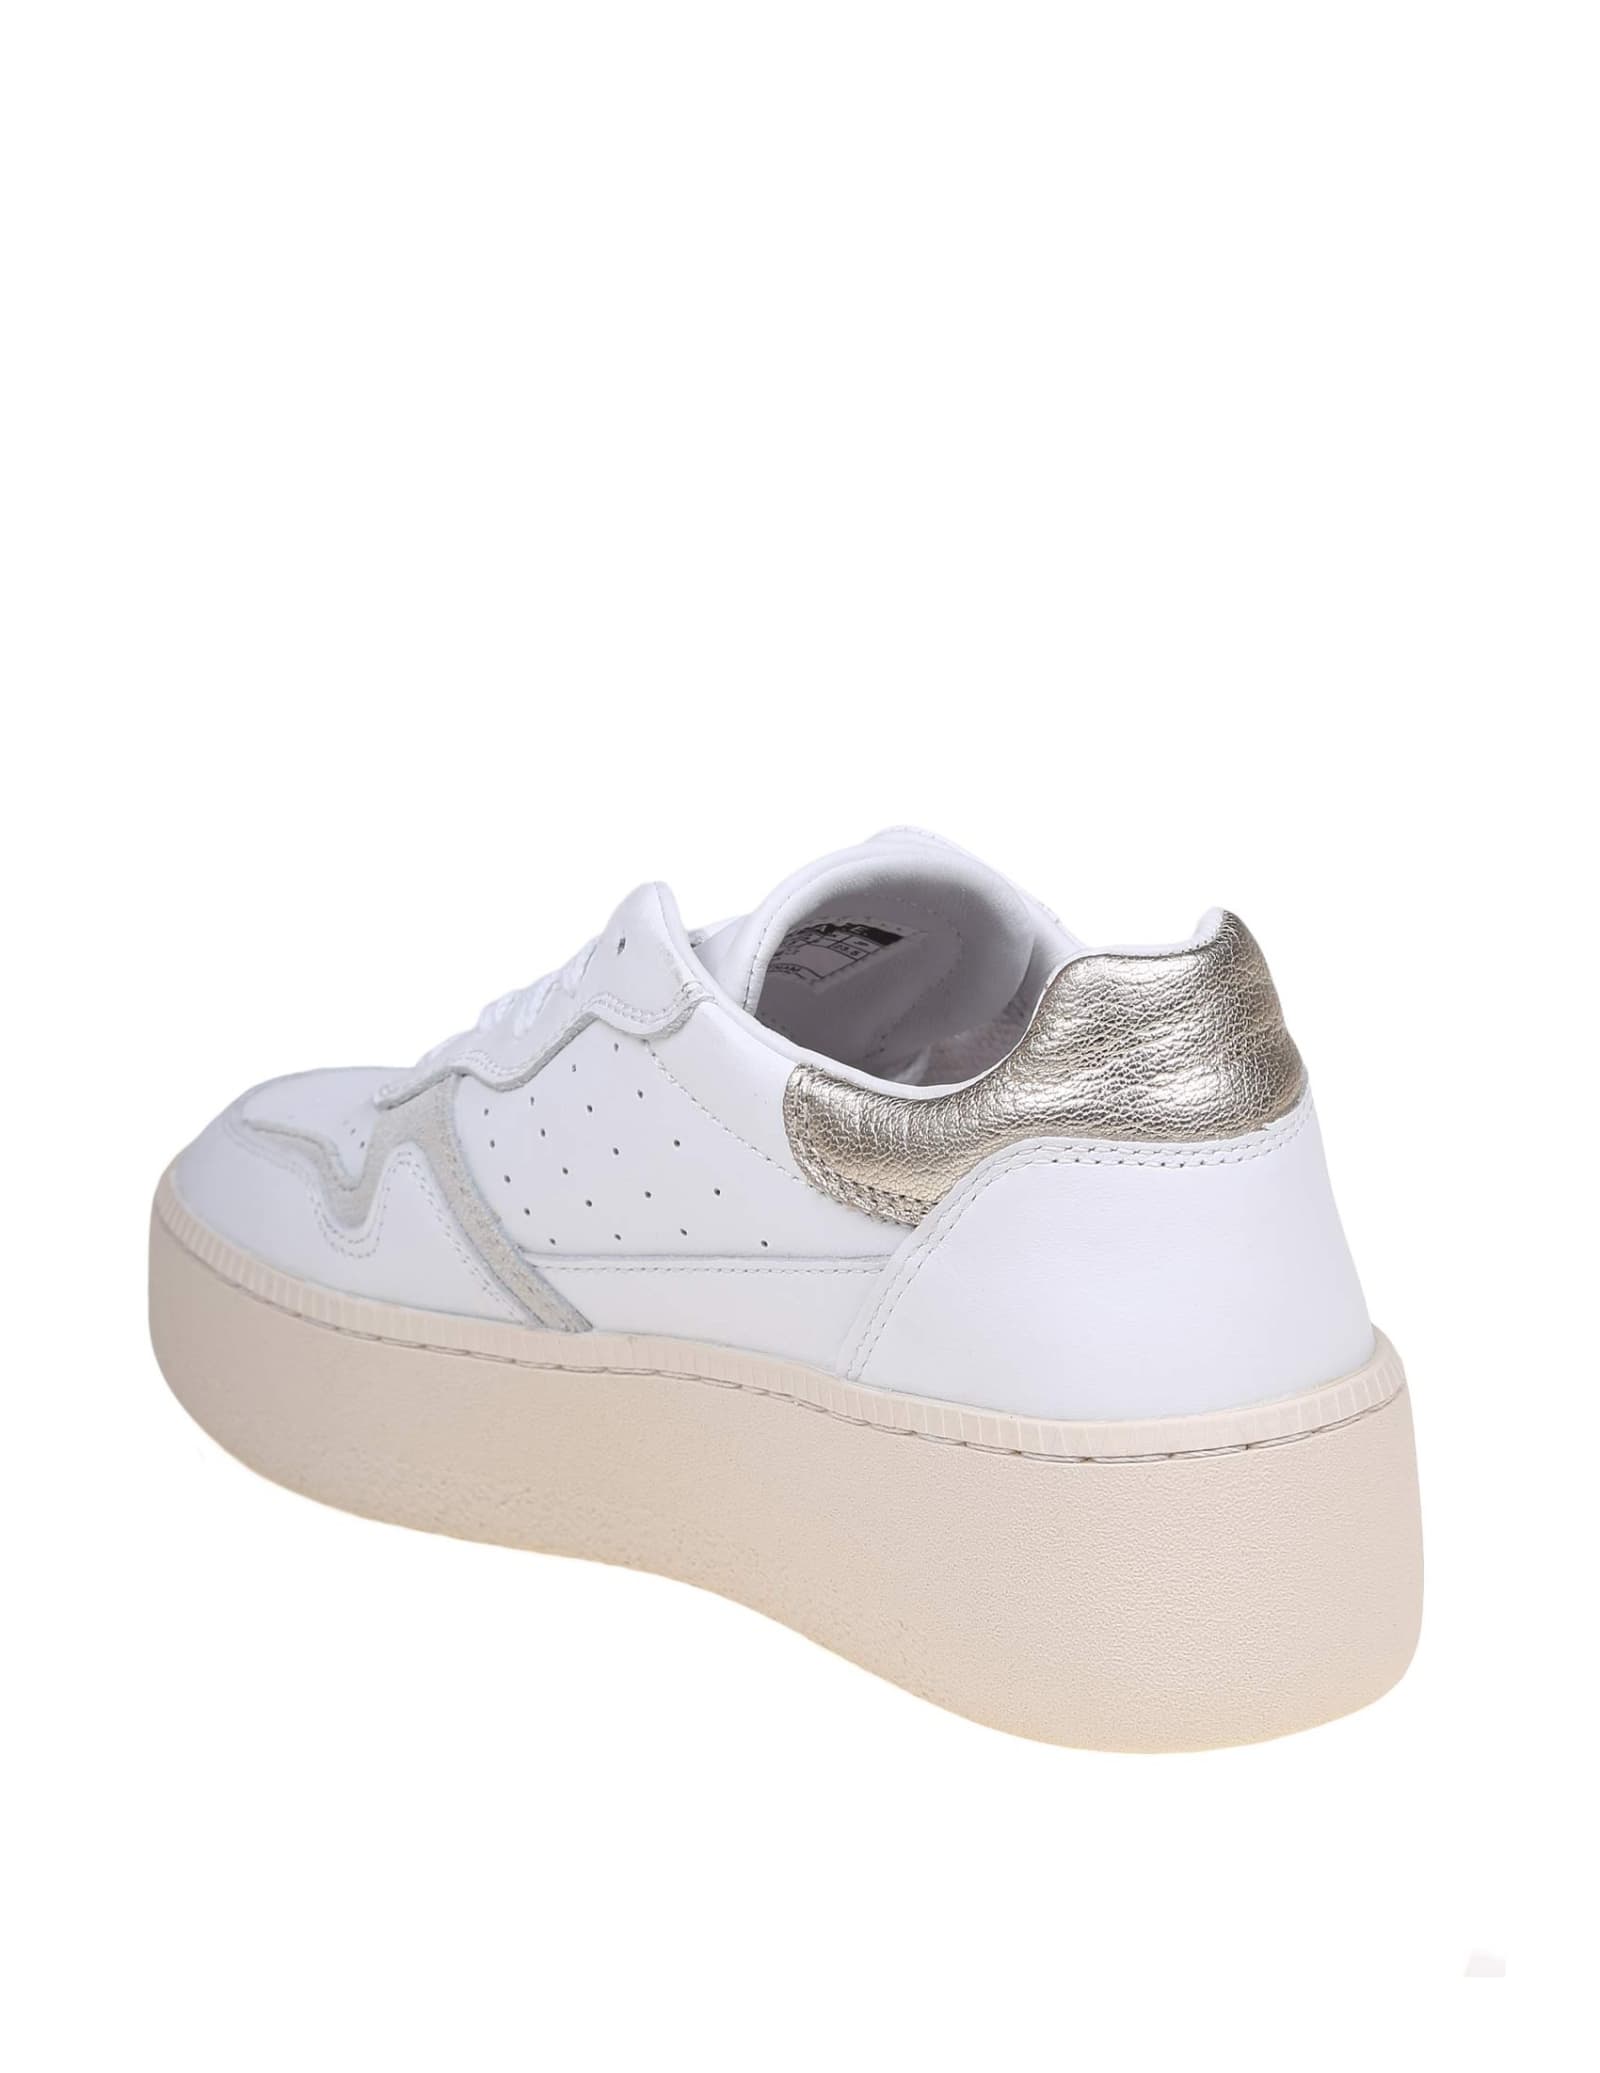 Shop Date Step Sneakers In White Leather In Platinum